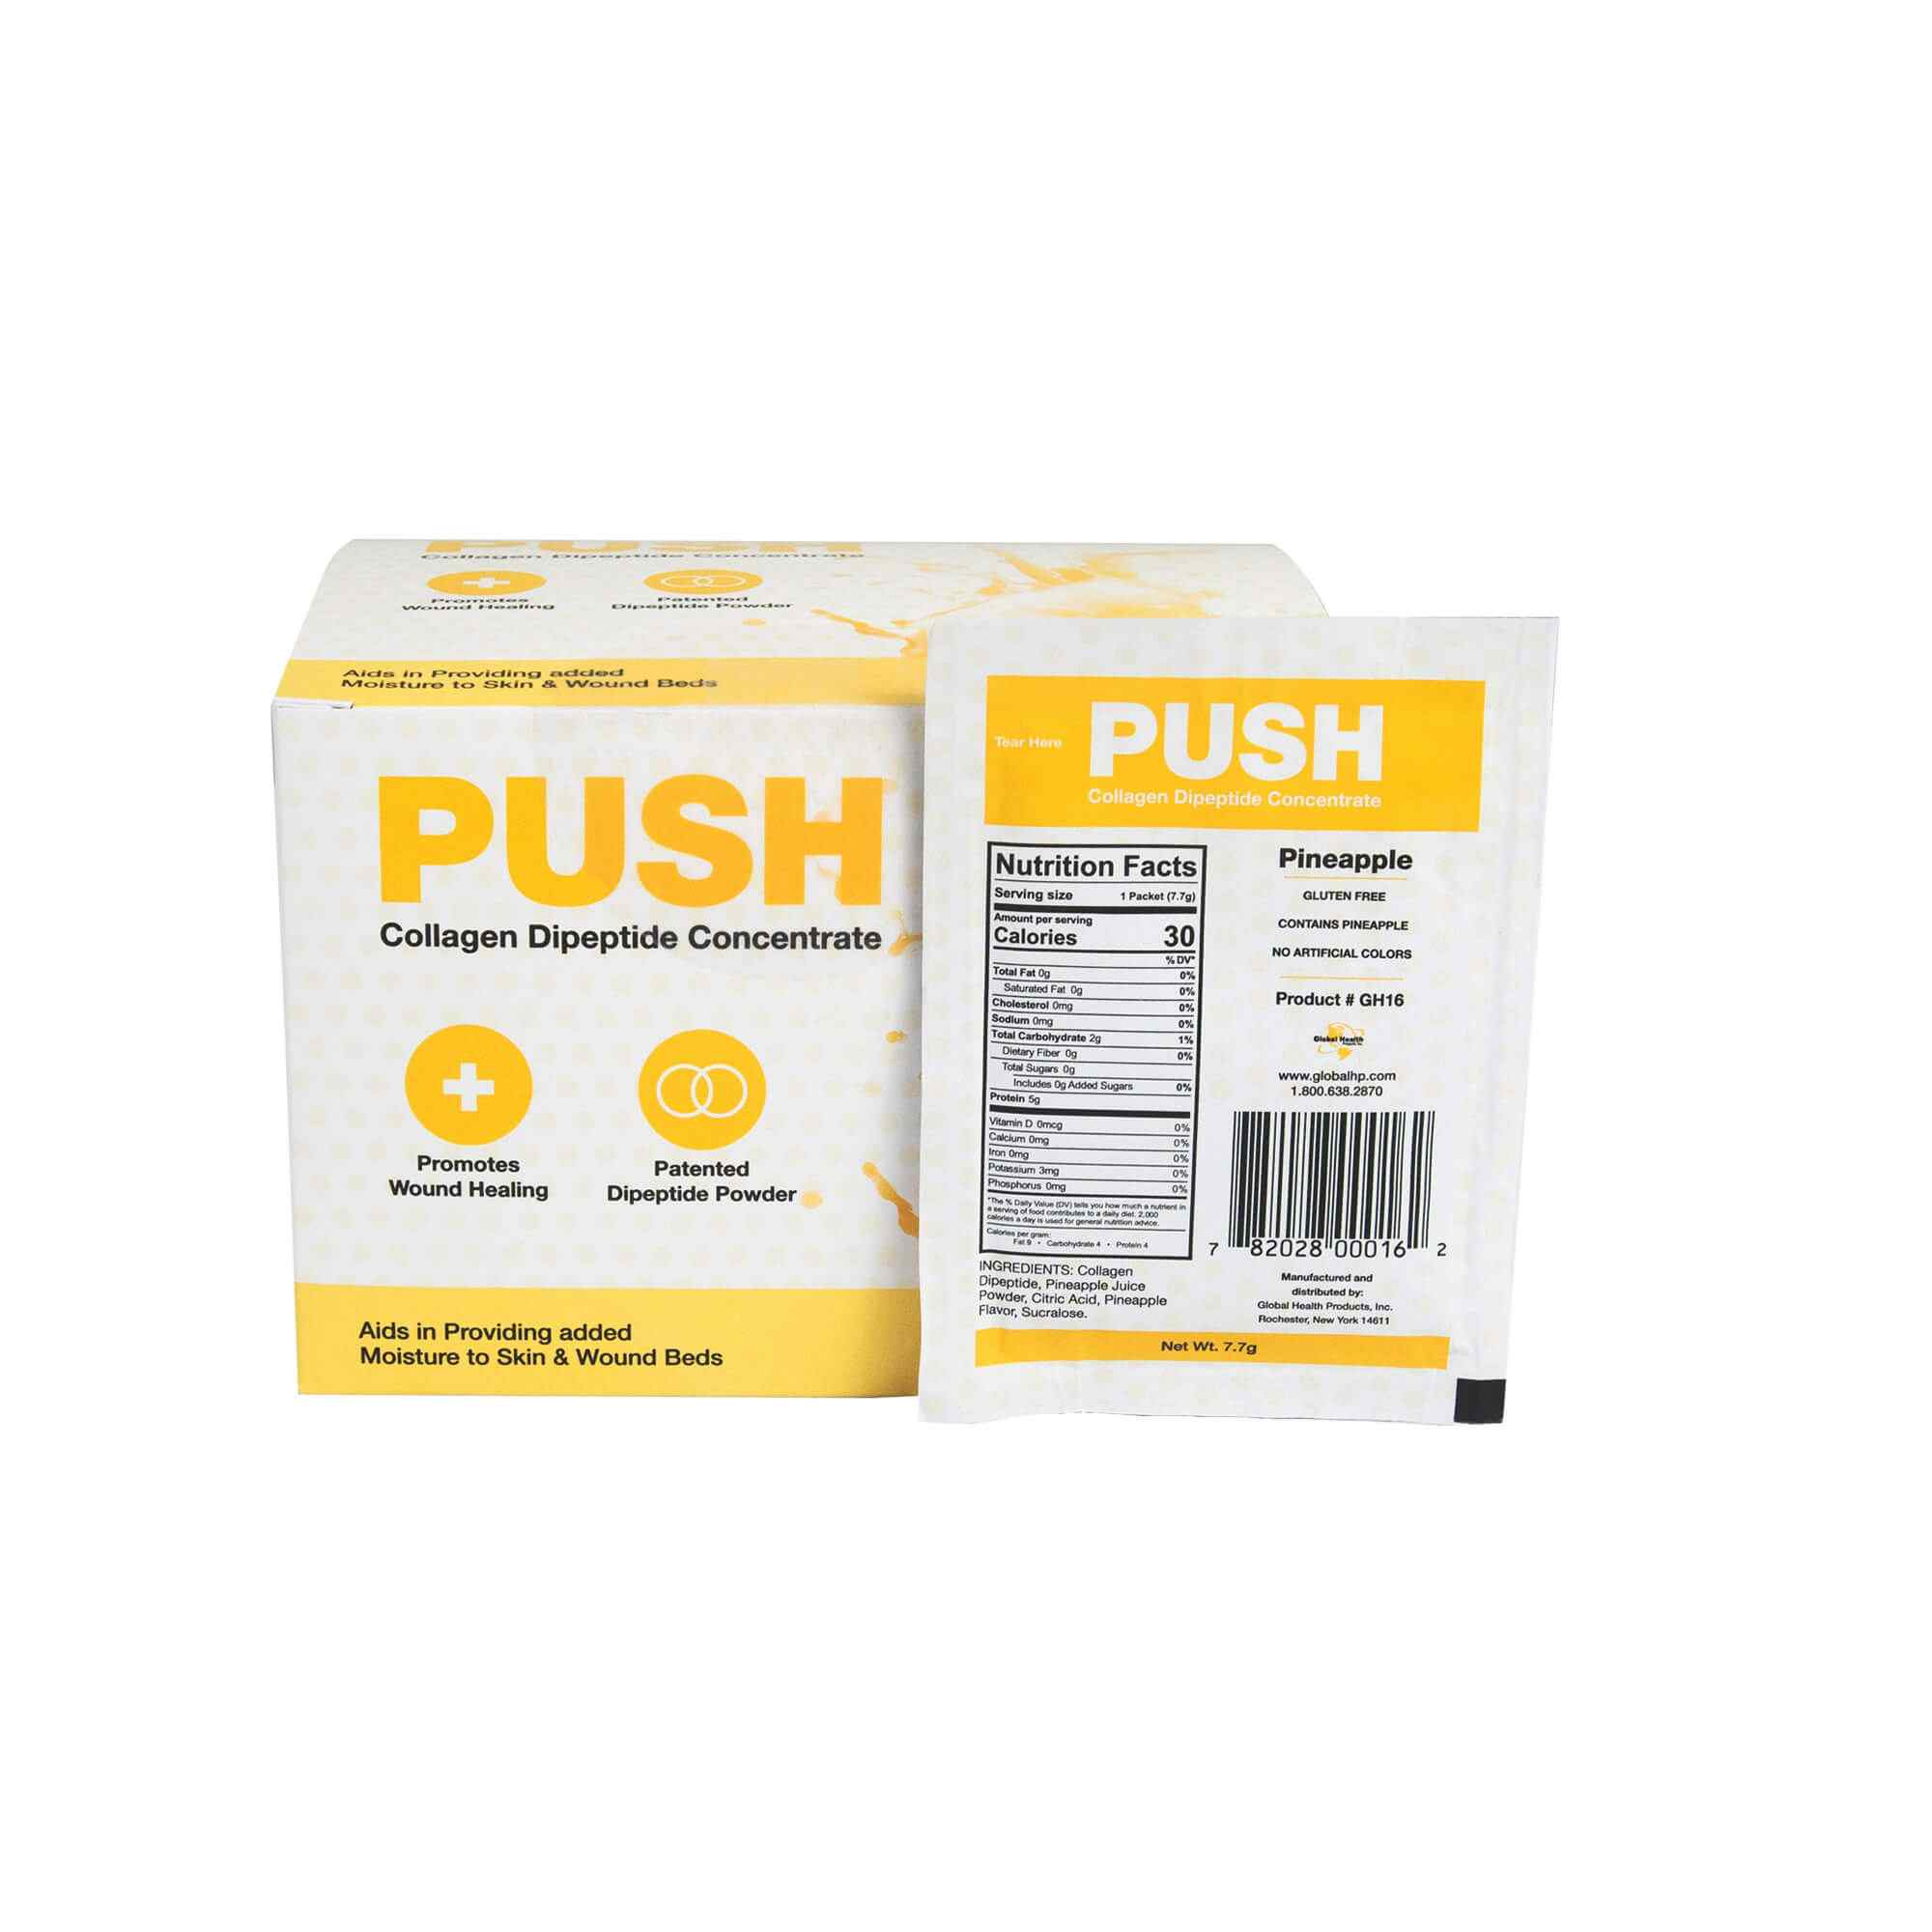 PUSH Collagen Dipeptide Concentrate